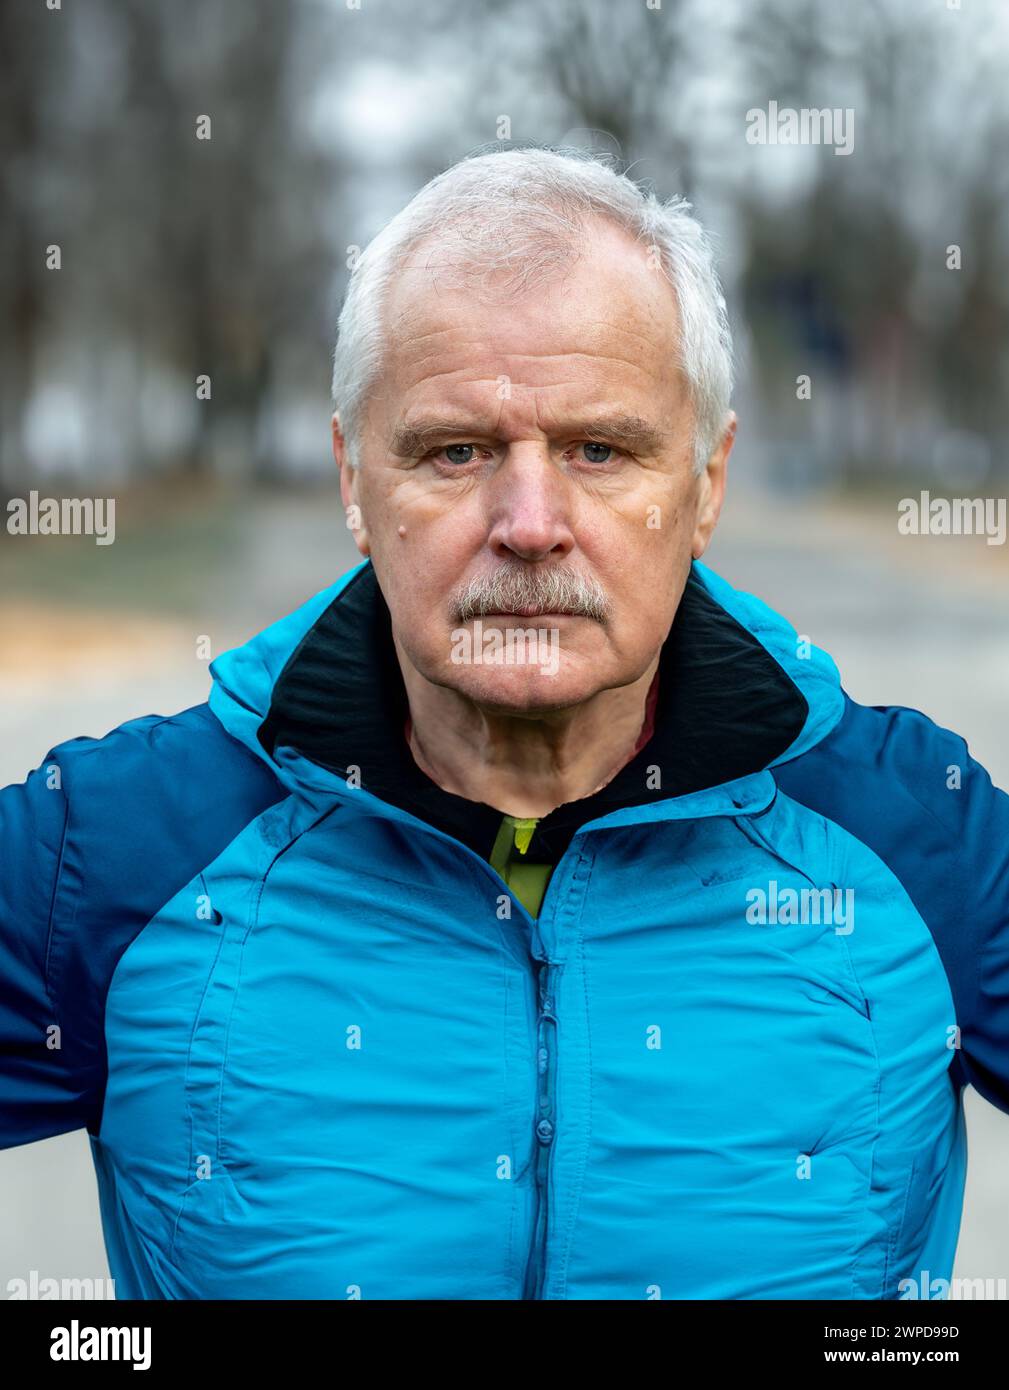 Senior man in sports wear looking into the camera. Symbol for elderly persons being active and doing workouts. Stock Photo